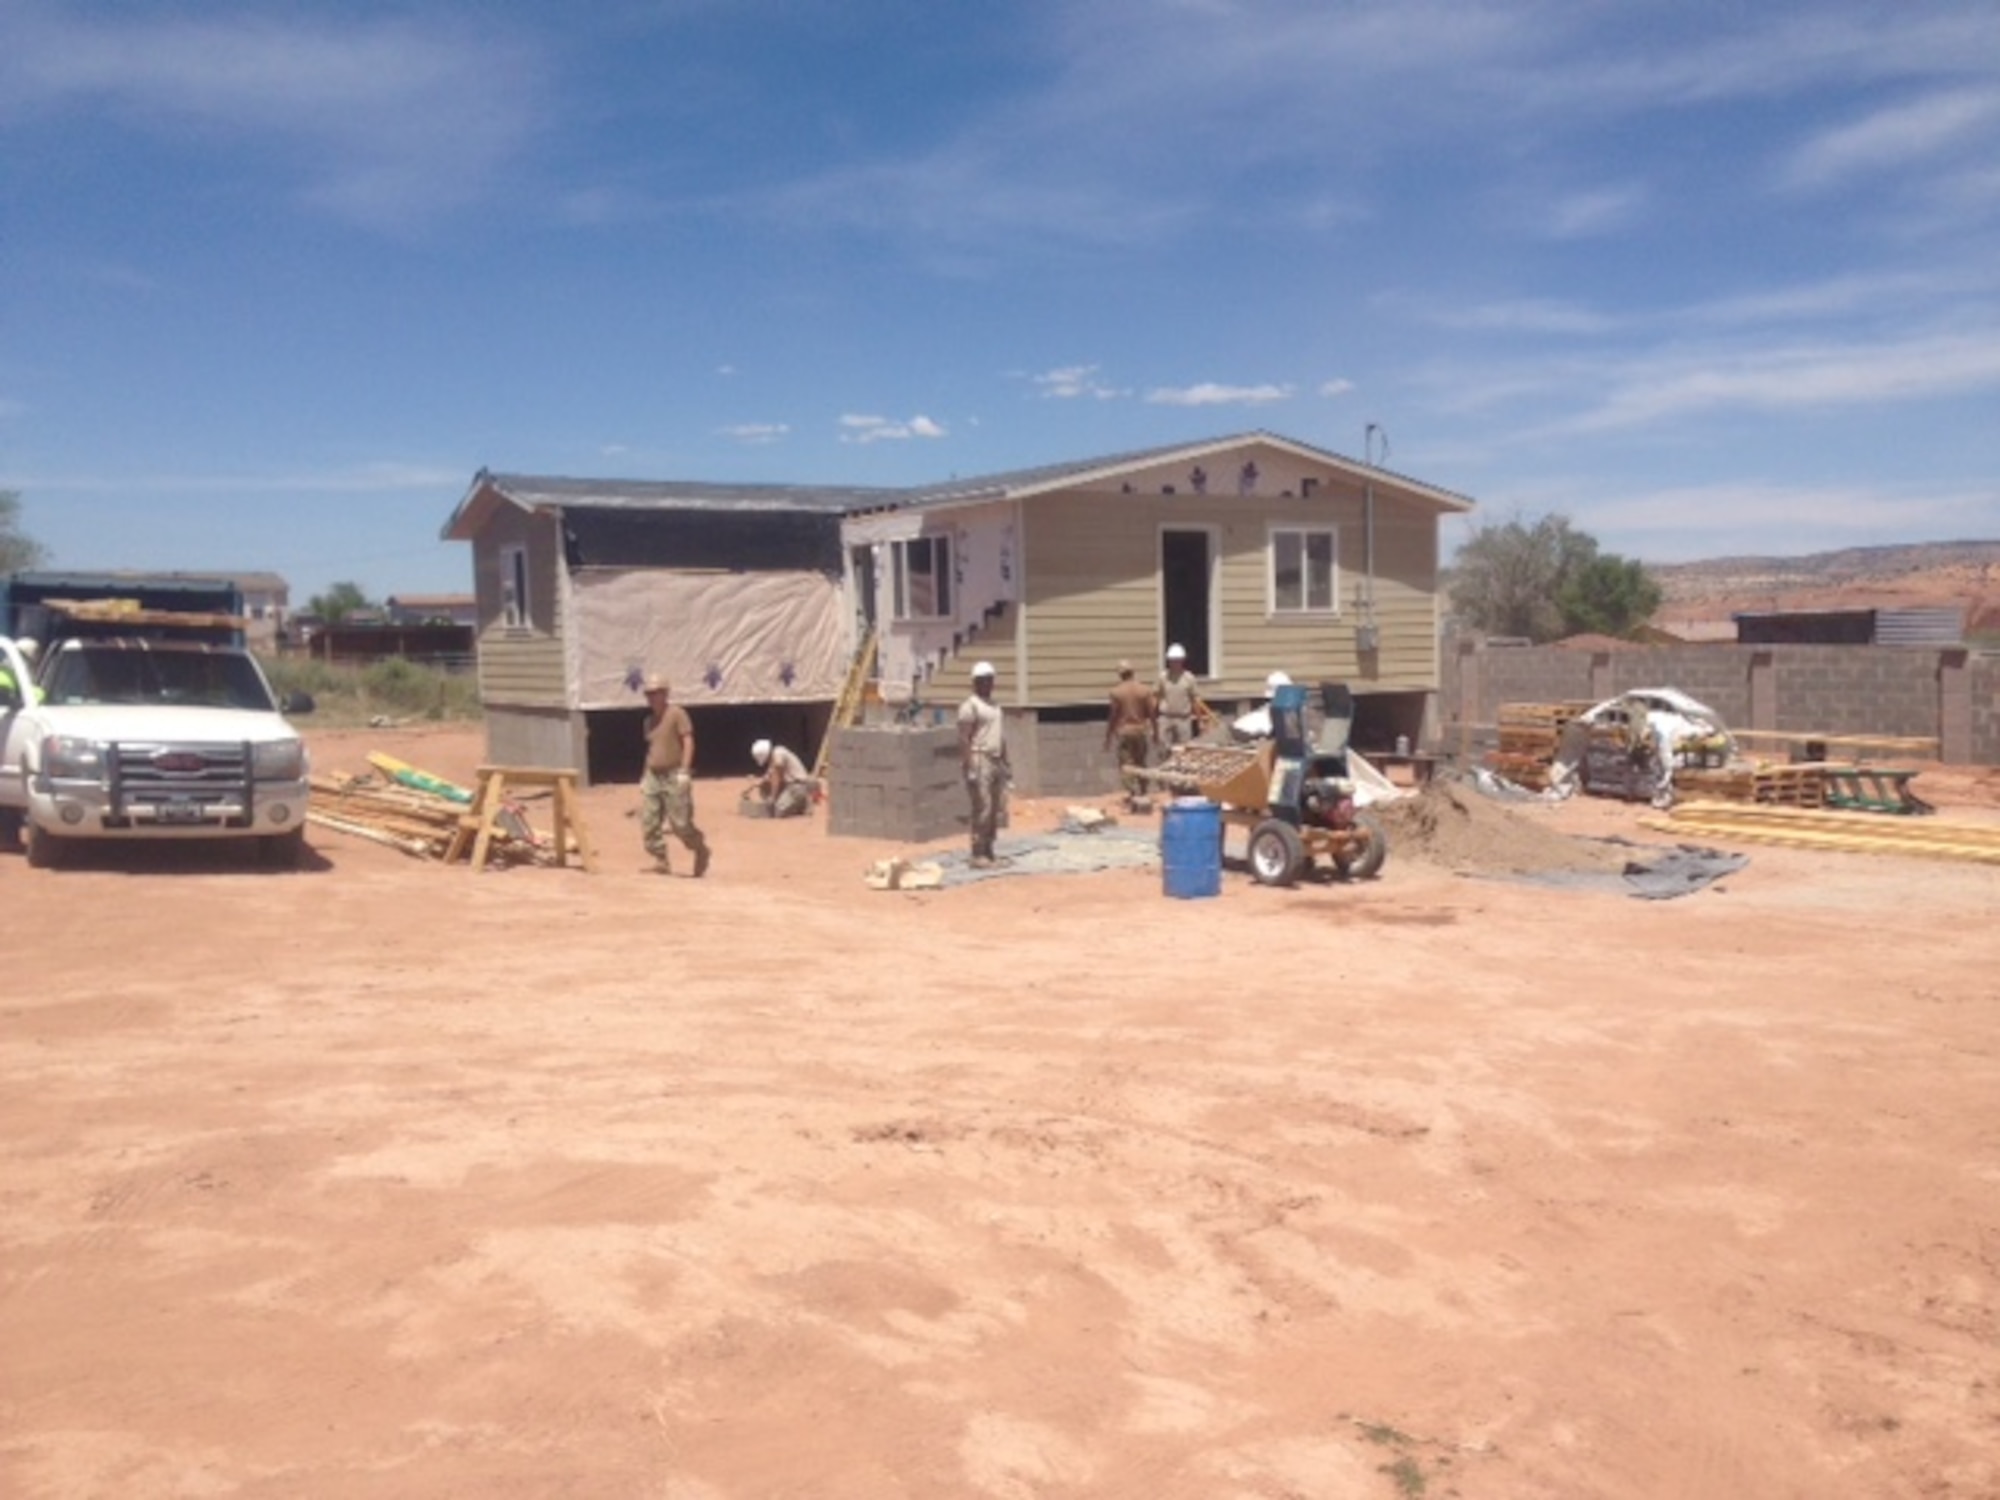 Through the Operation Footprint partnership, twenty-four Air Force Reservists from the 302nd Civil Engineer Squadron helped build new homes for the Navajo Nation during Innovative Readiness Training, May 22 to June 5, 2016 in Gallup, N.M. The 302nd CES contributed to completing the construction of five new homes during their two-week training. (Courtesy photo)